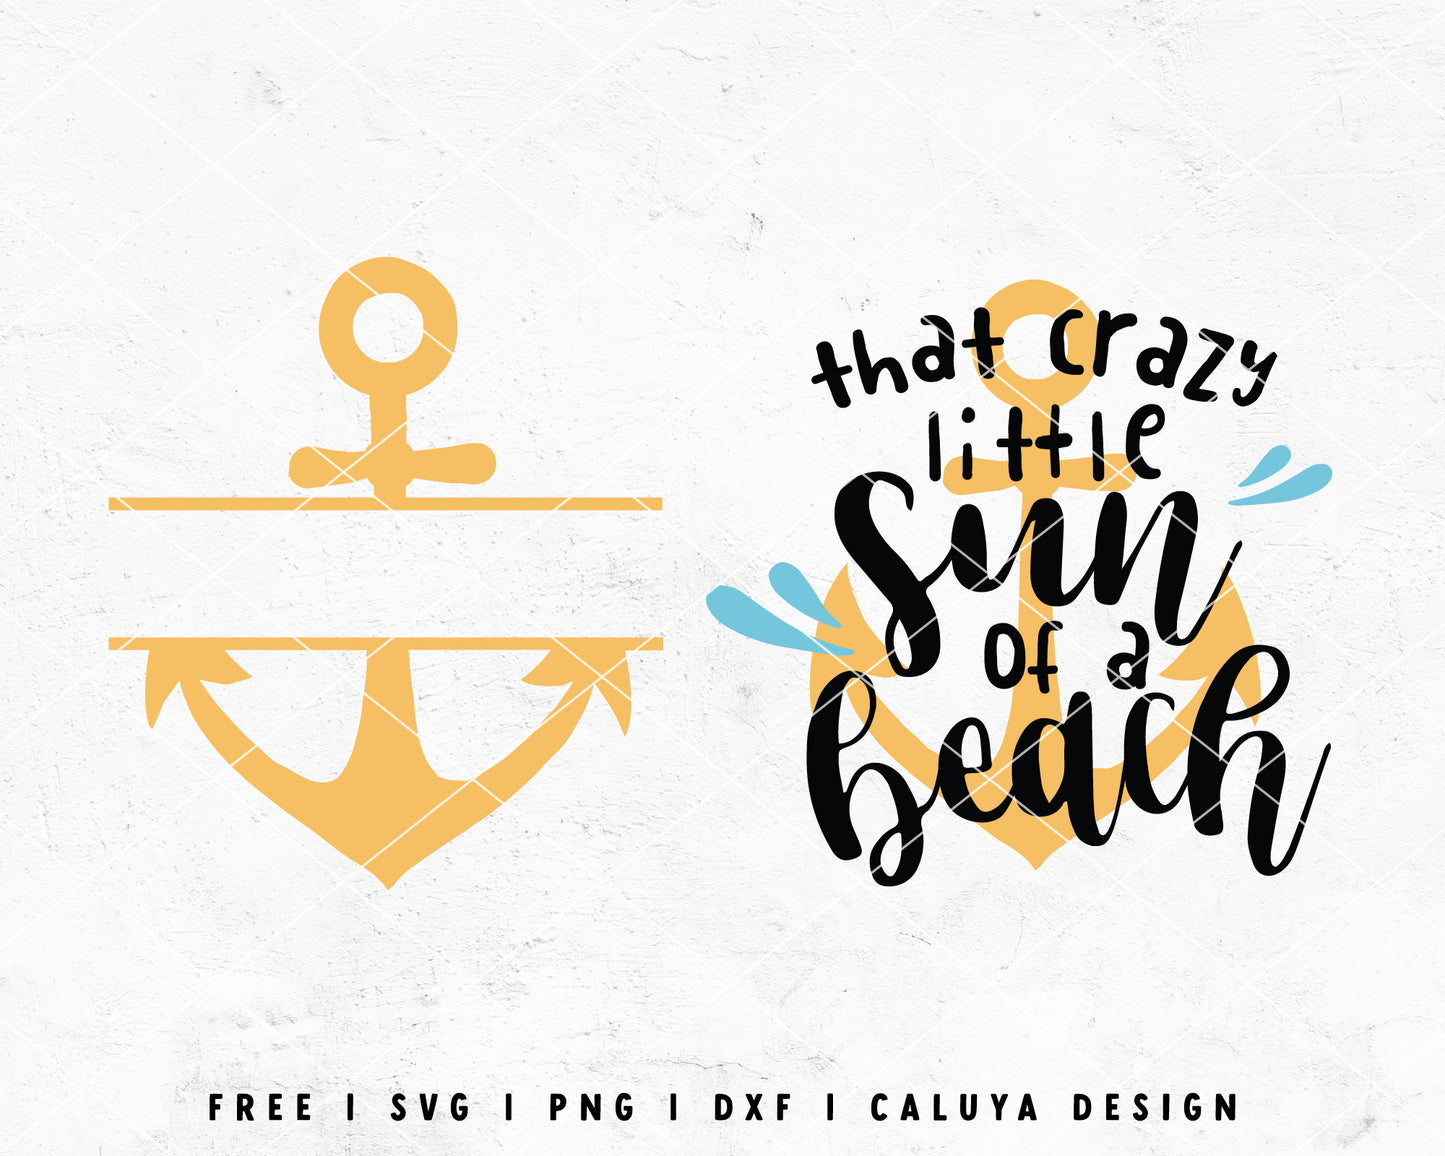 FREE Summer SVG | Anchor SVG | Monogram SVG Cut File for Cricut, Cameo Silhouette | Free SVG Cut File